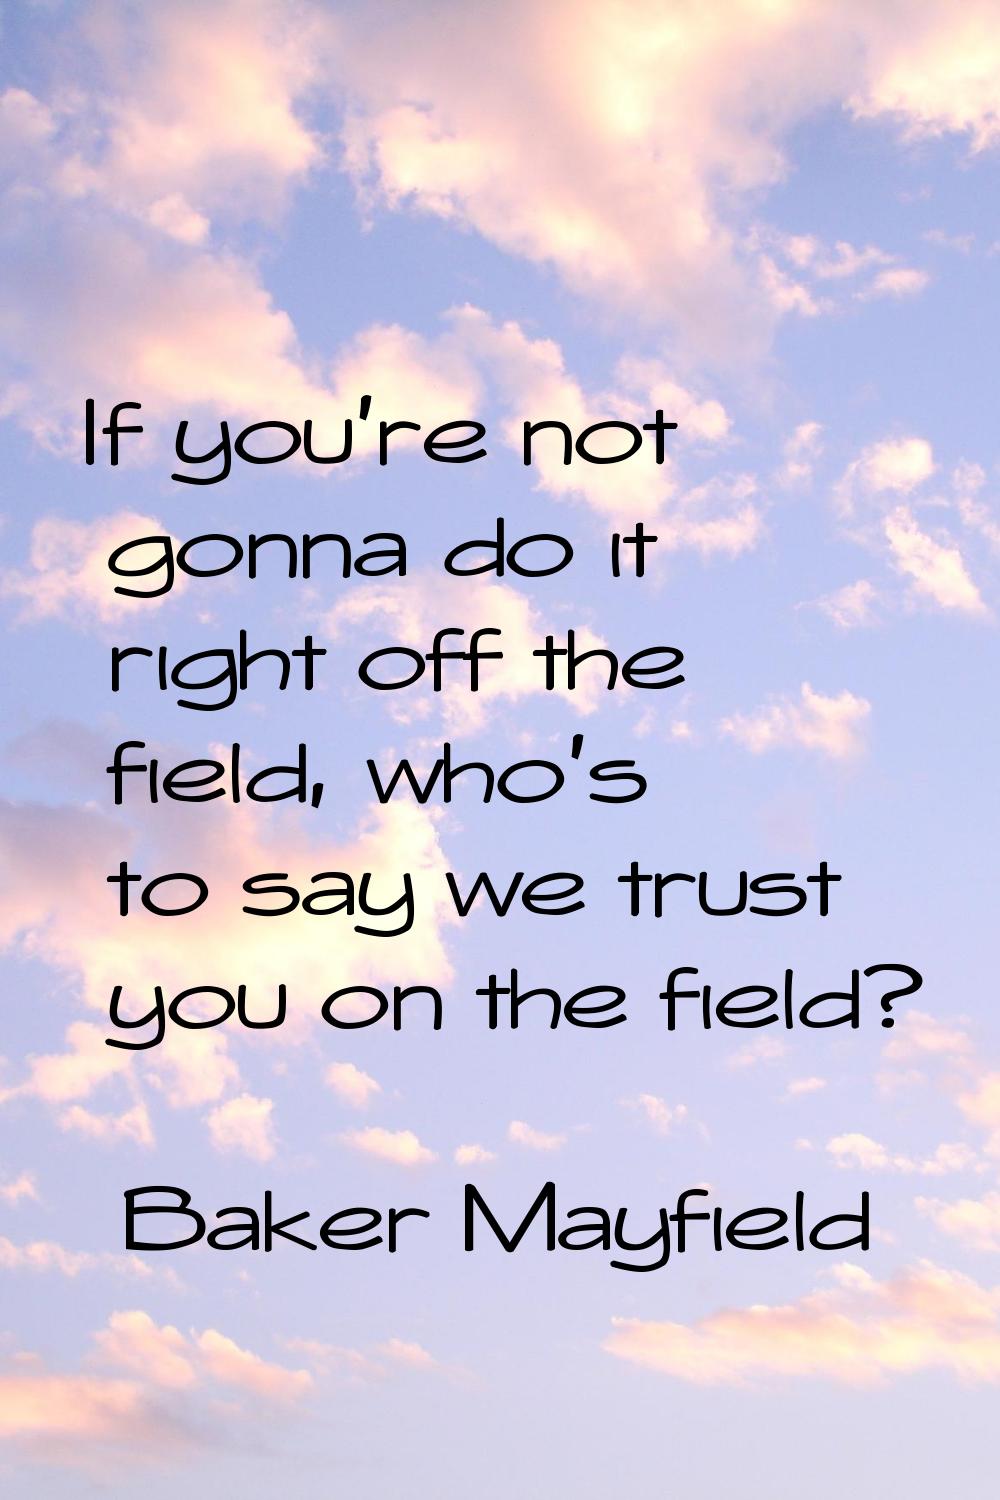 If you're not gonna do it right off the field, who's to say we trust you on the field?